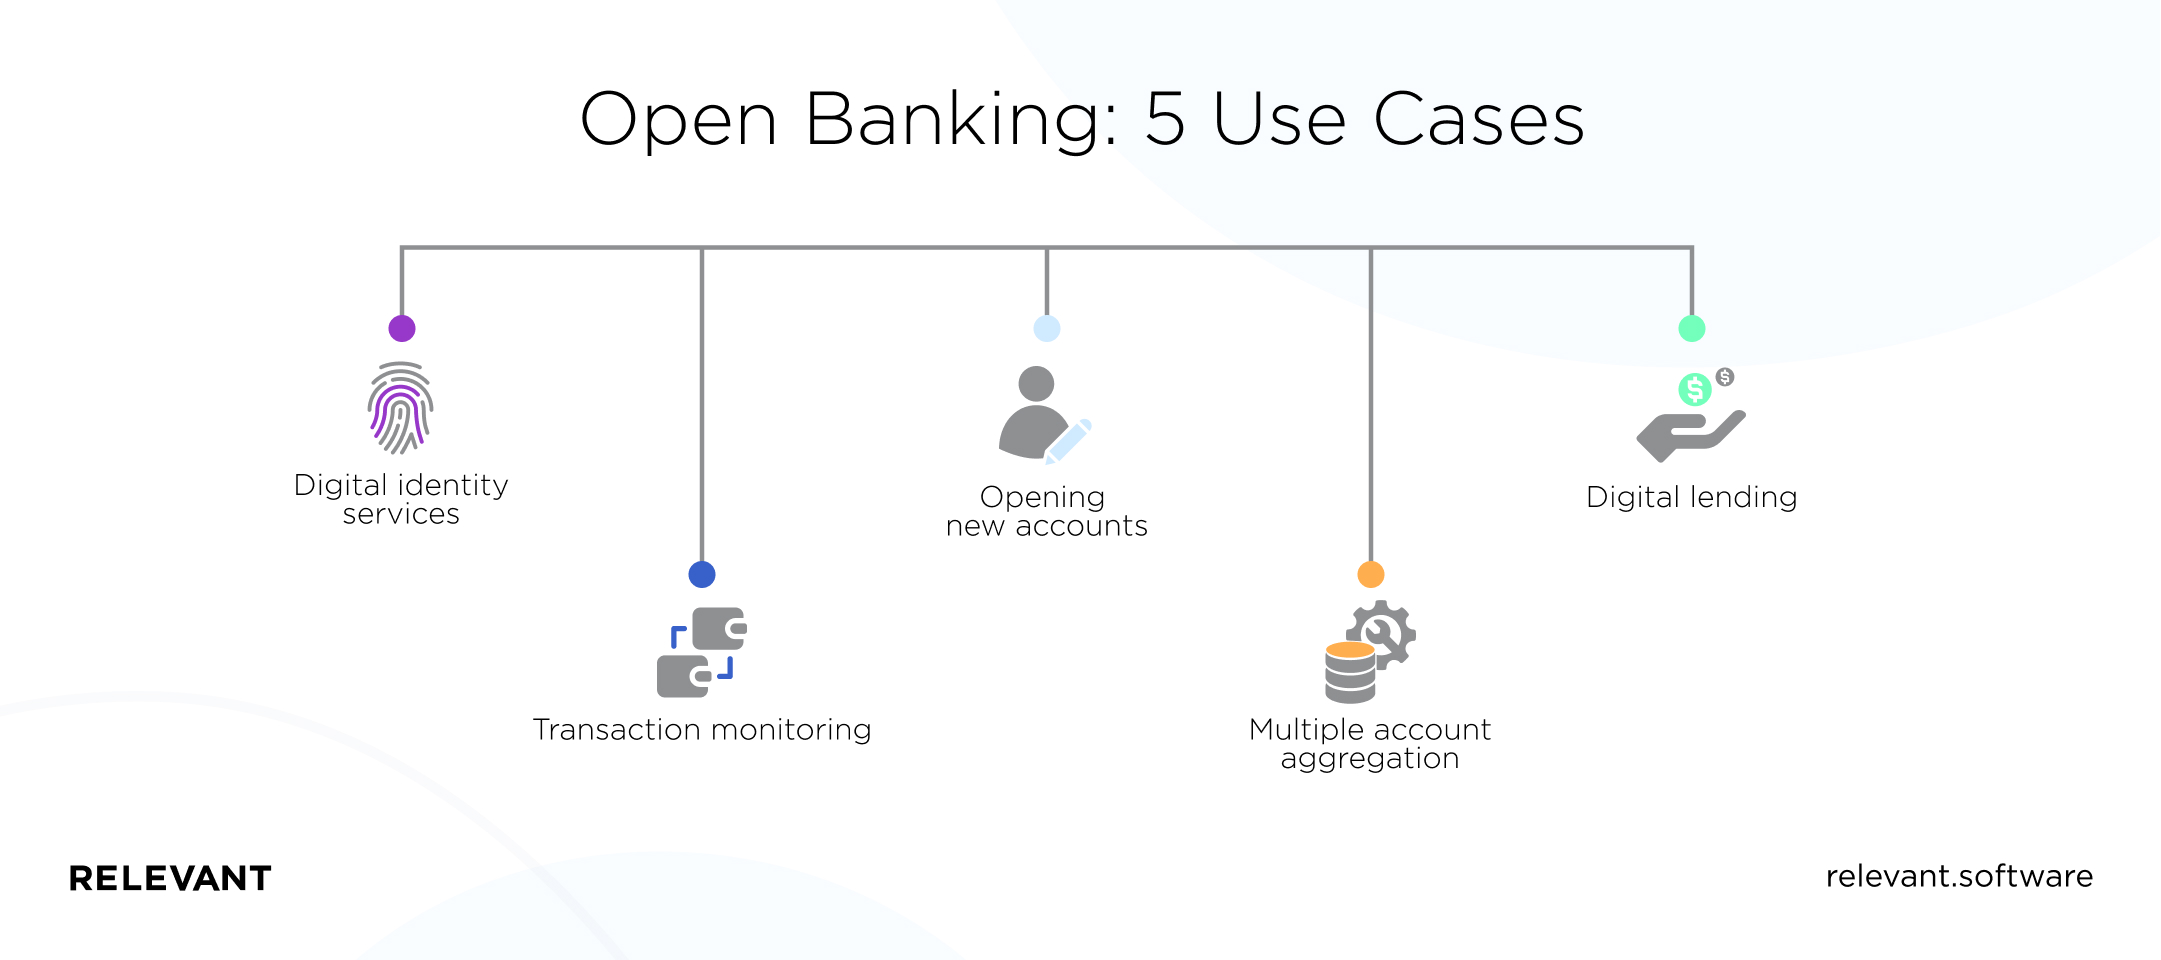 Open Banking: 5 Use Cases